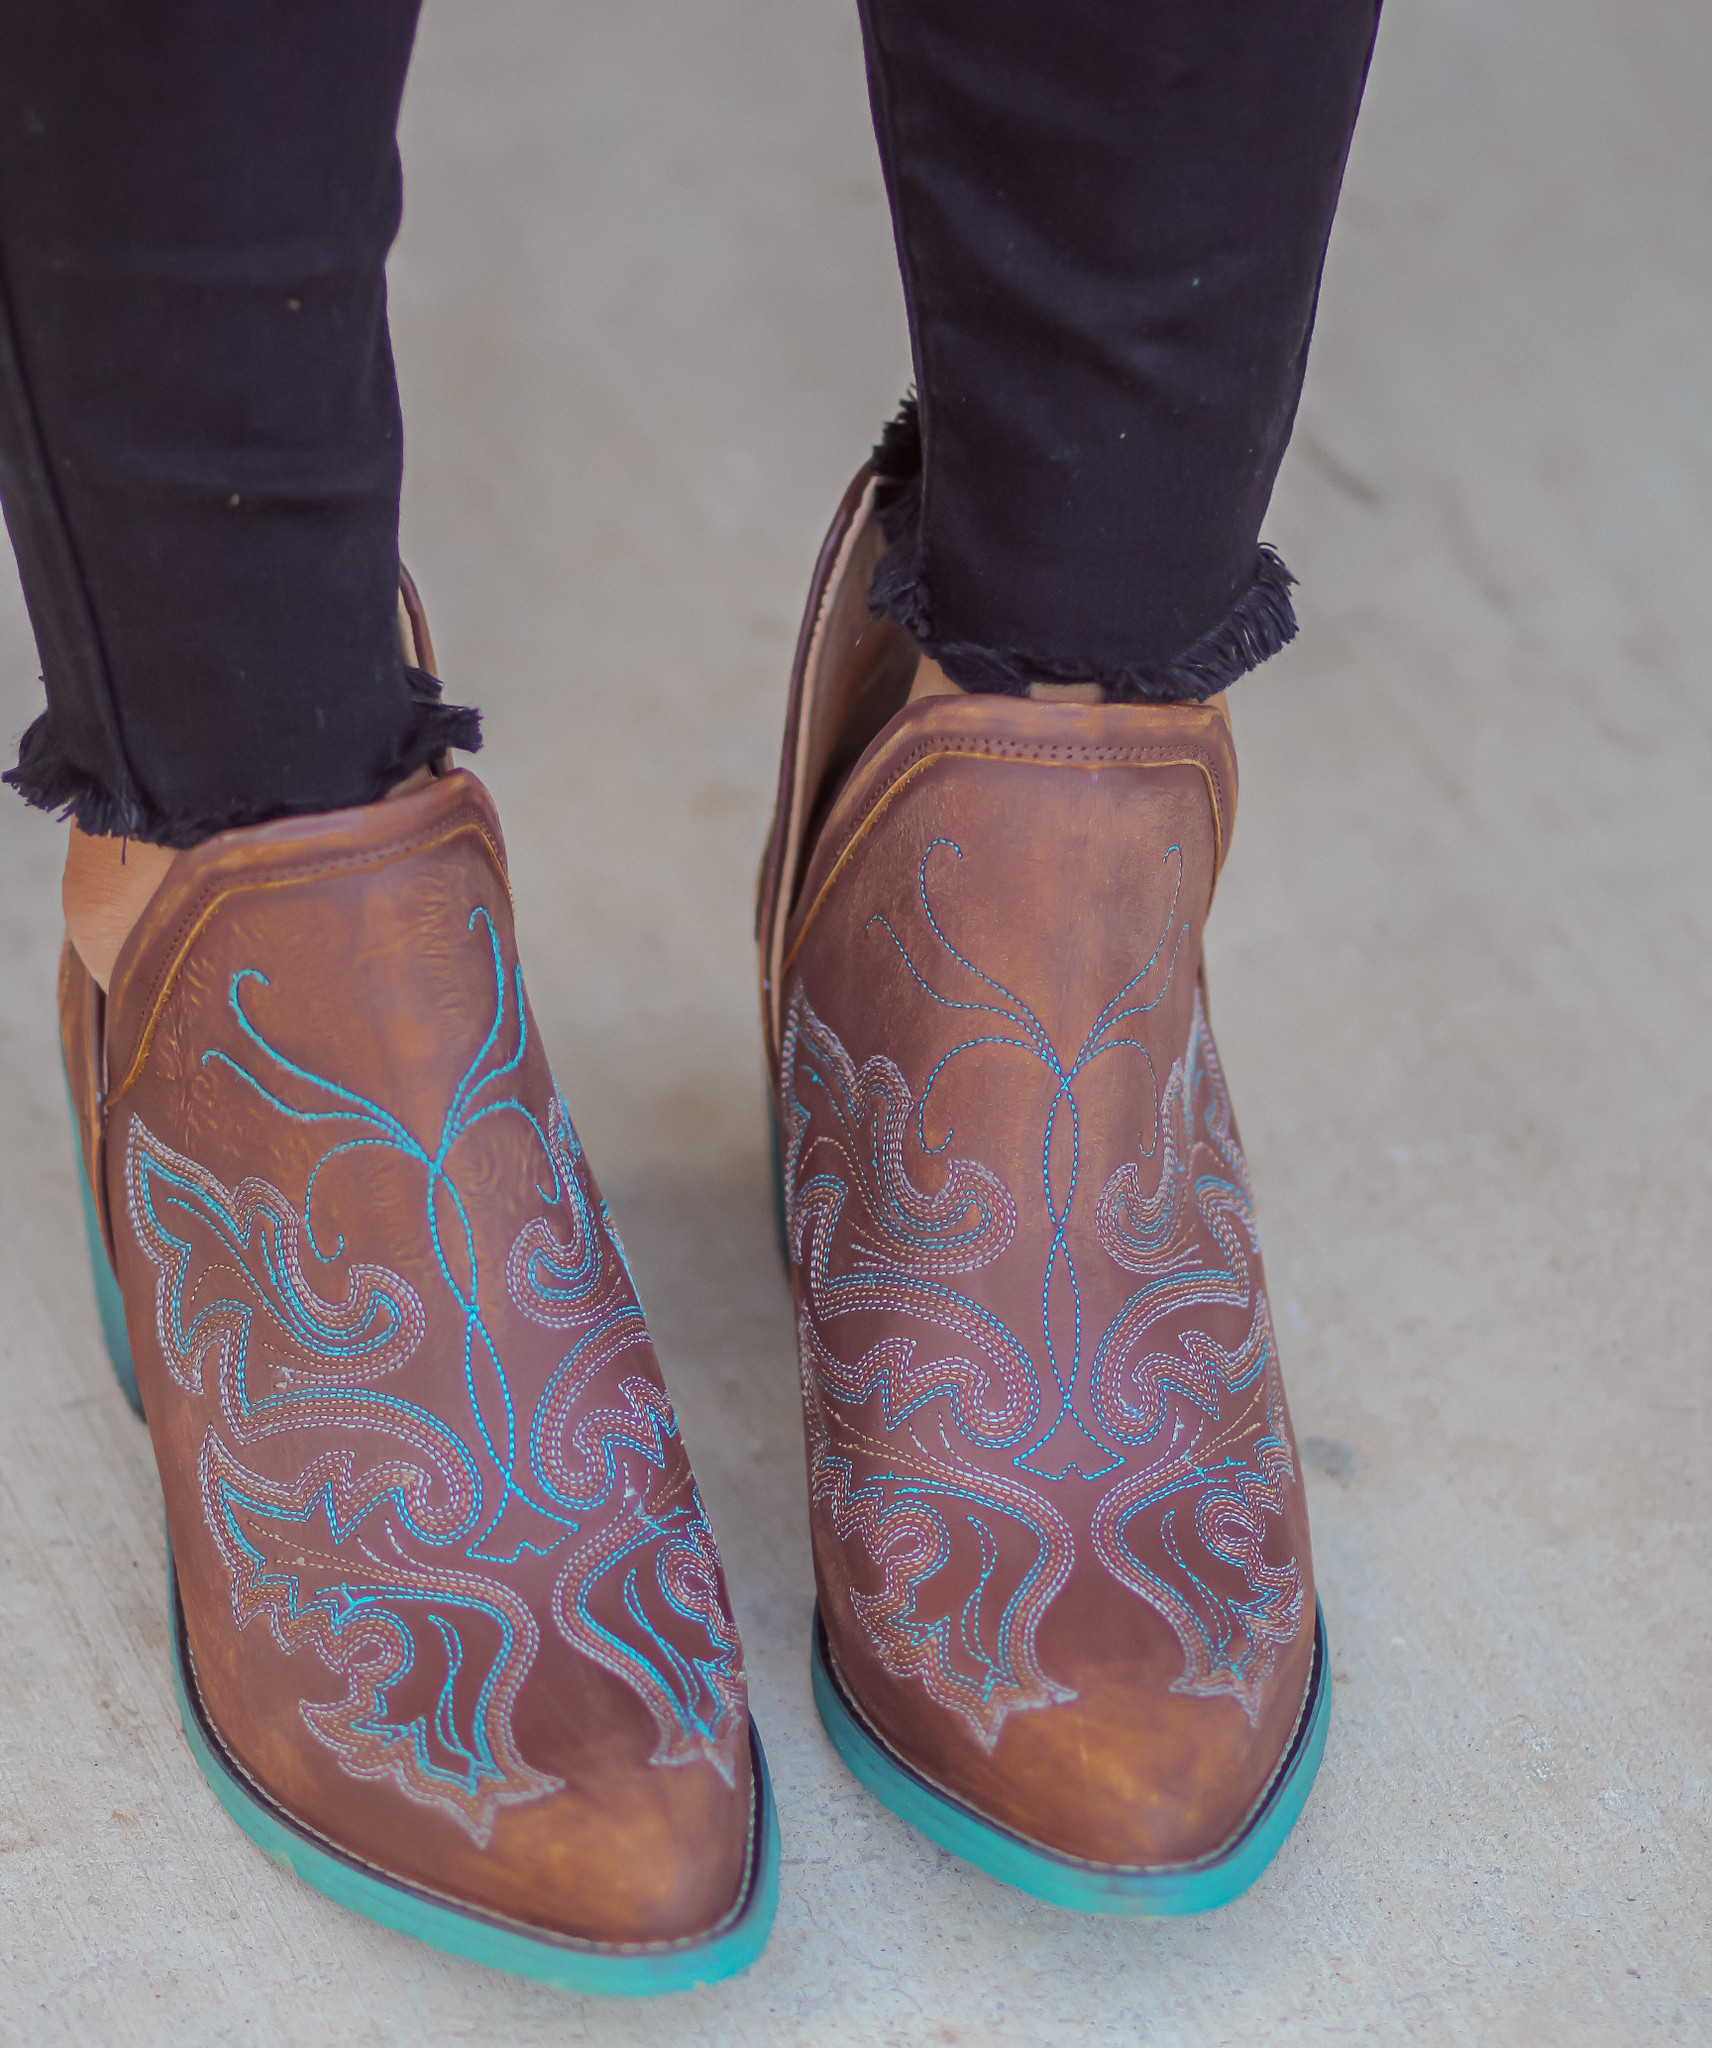 Corral Cognac Embroidery Shoe Boot Q0099